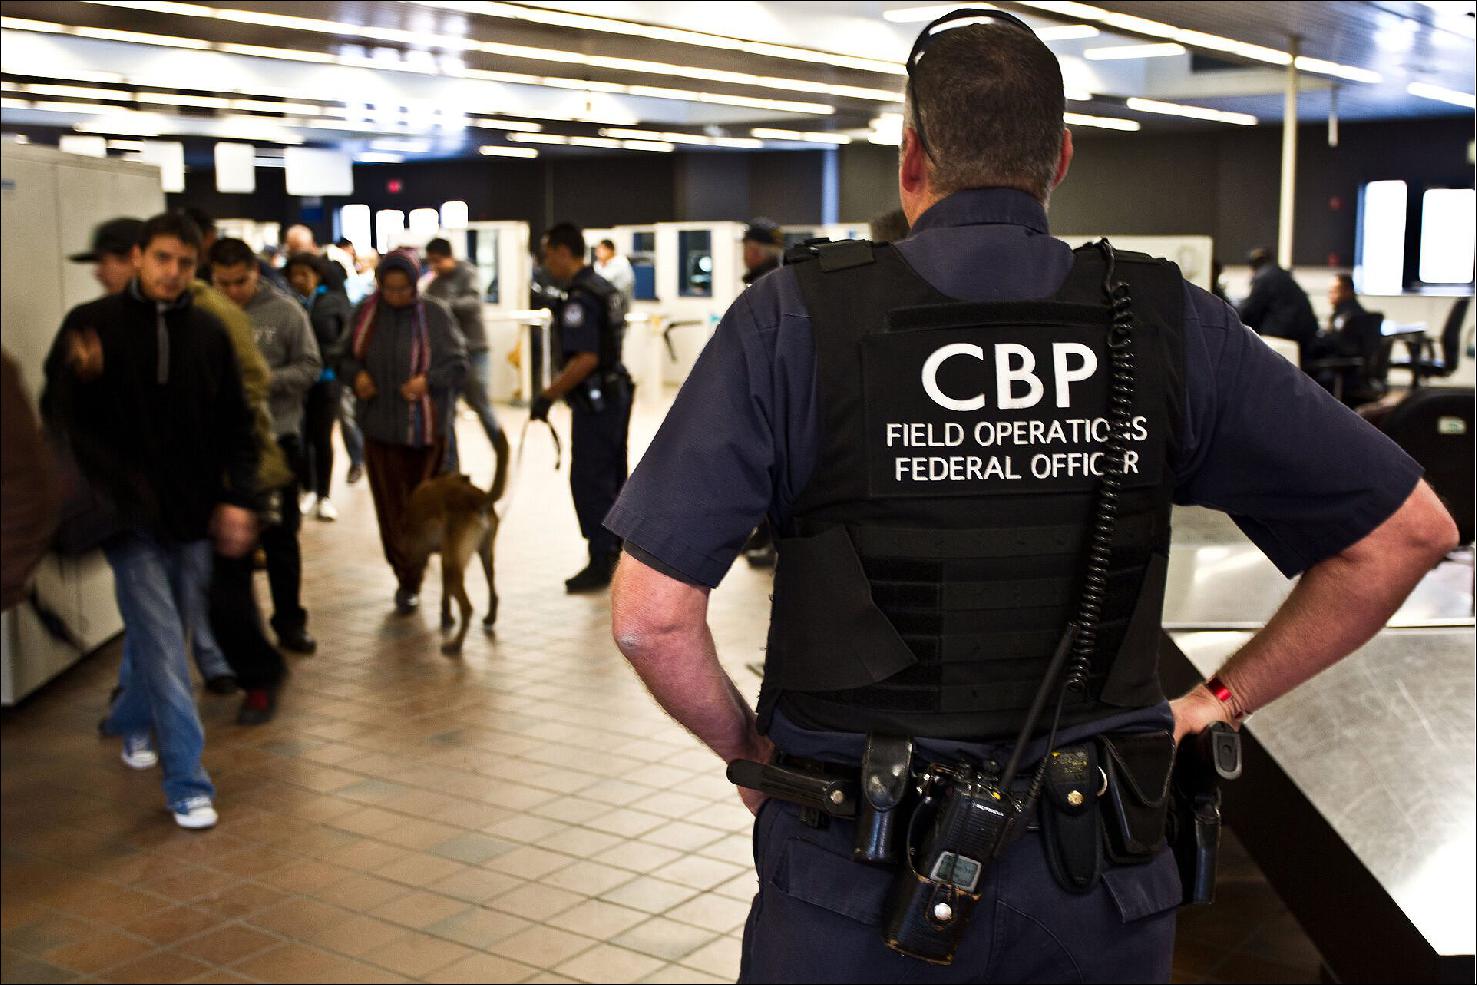 Figure 1: The US Customs and Border Protection agency is among the latest of more than 200 users of the passive terahertz imaging technology, co-patented by ESA and marketed by ThruVision, deploying it at selected southern border ports of entry (image credit: US Customs and Border Protection)